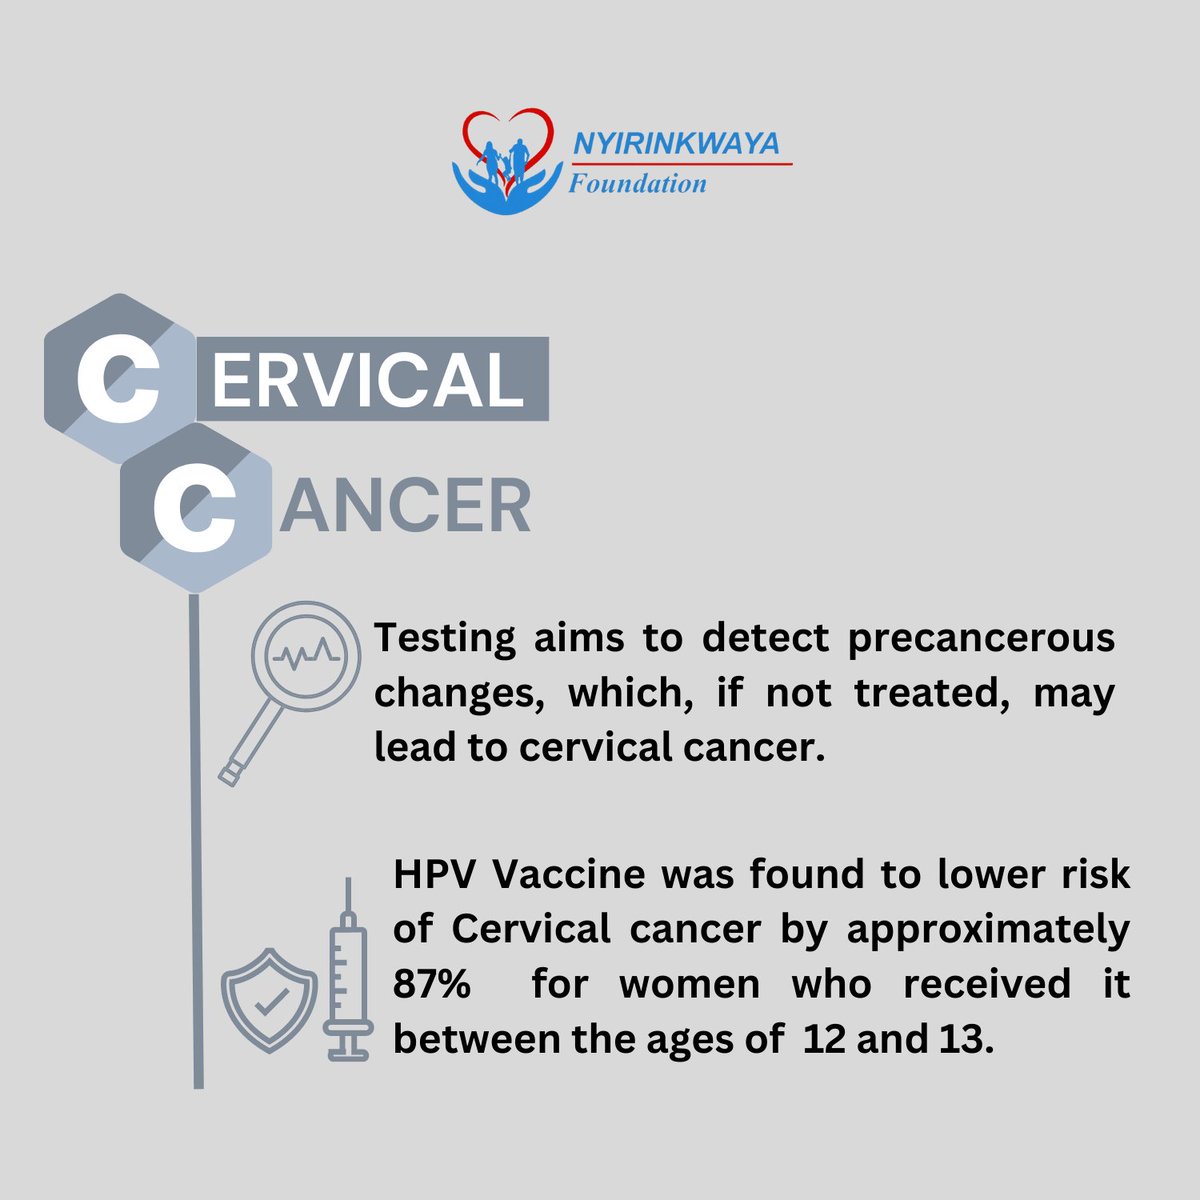 HPV Vaccination and Testing are key to cervical cancer prevention.  #GetScreened #GetInformed